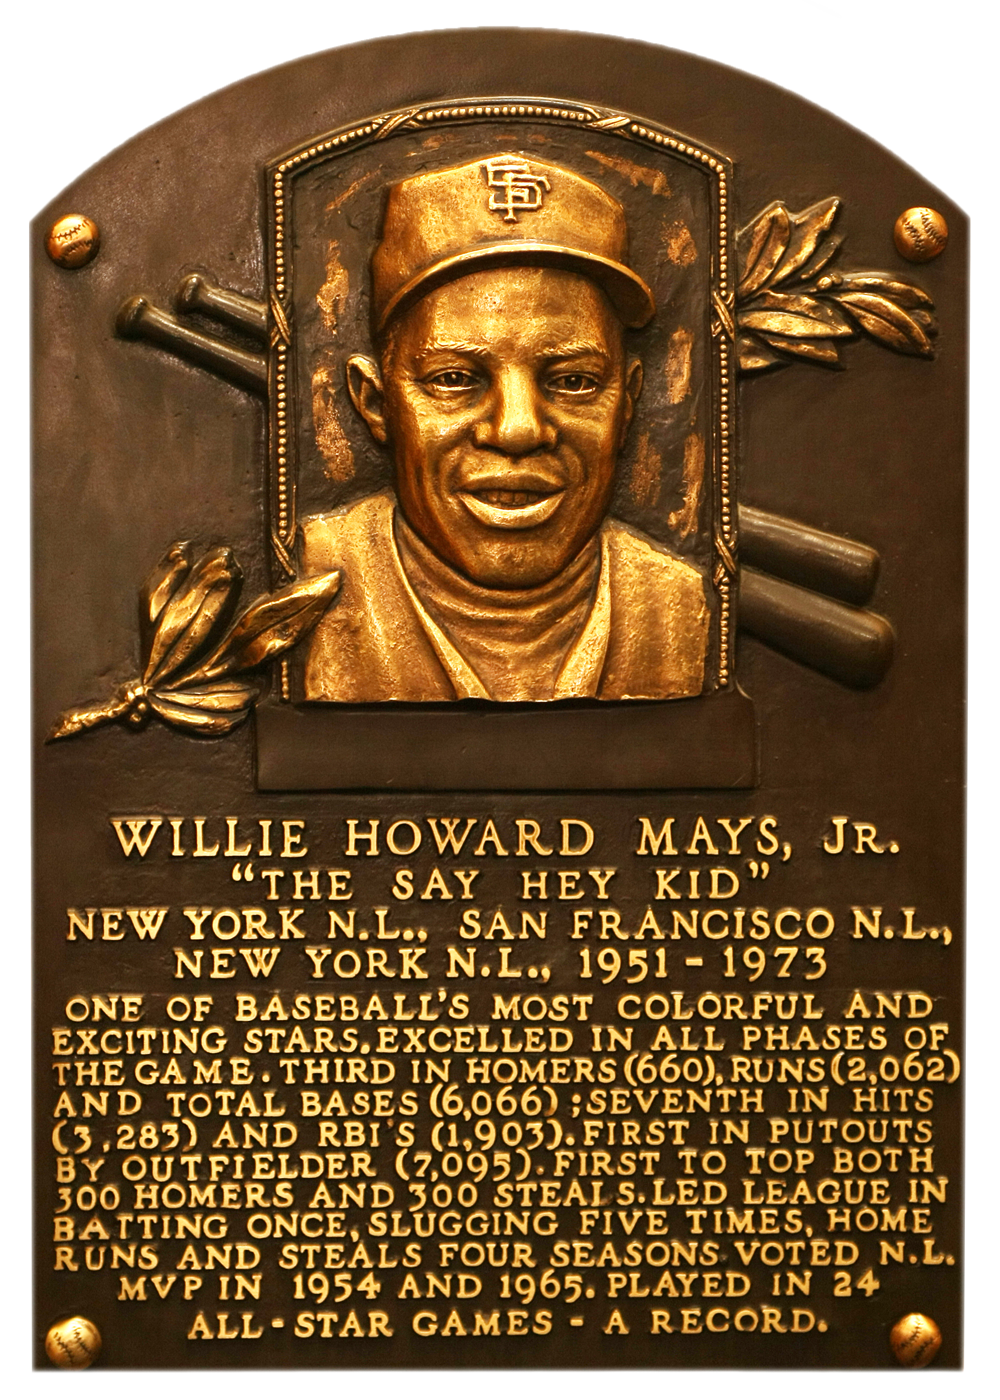 Willie Mays Hall of Fame plaque